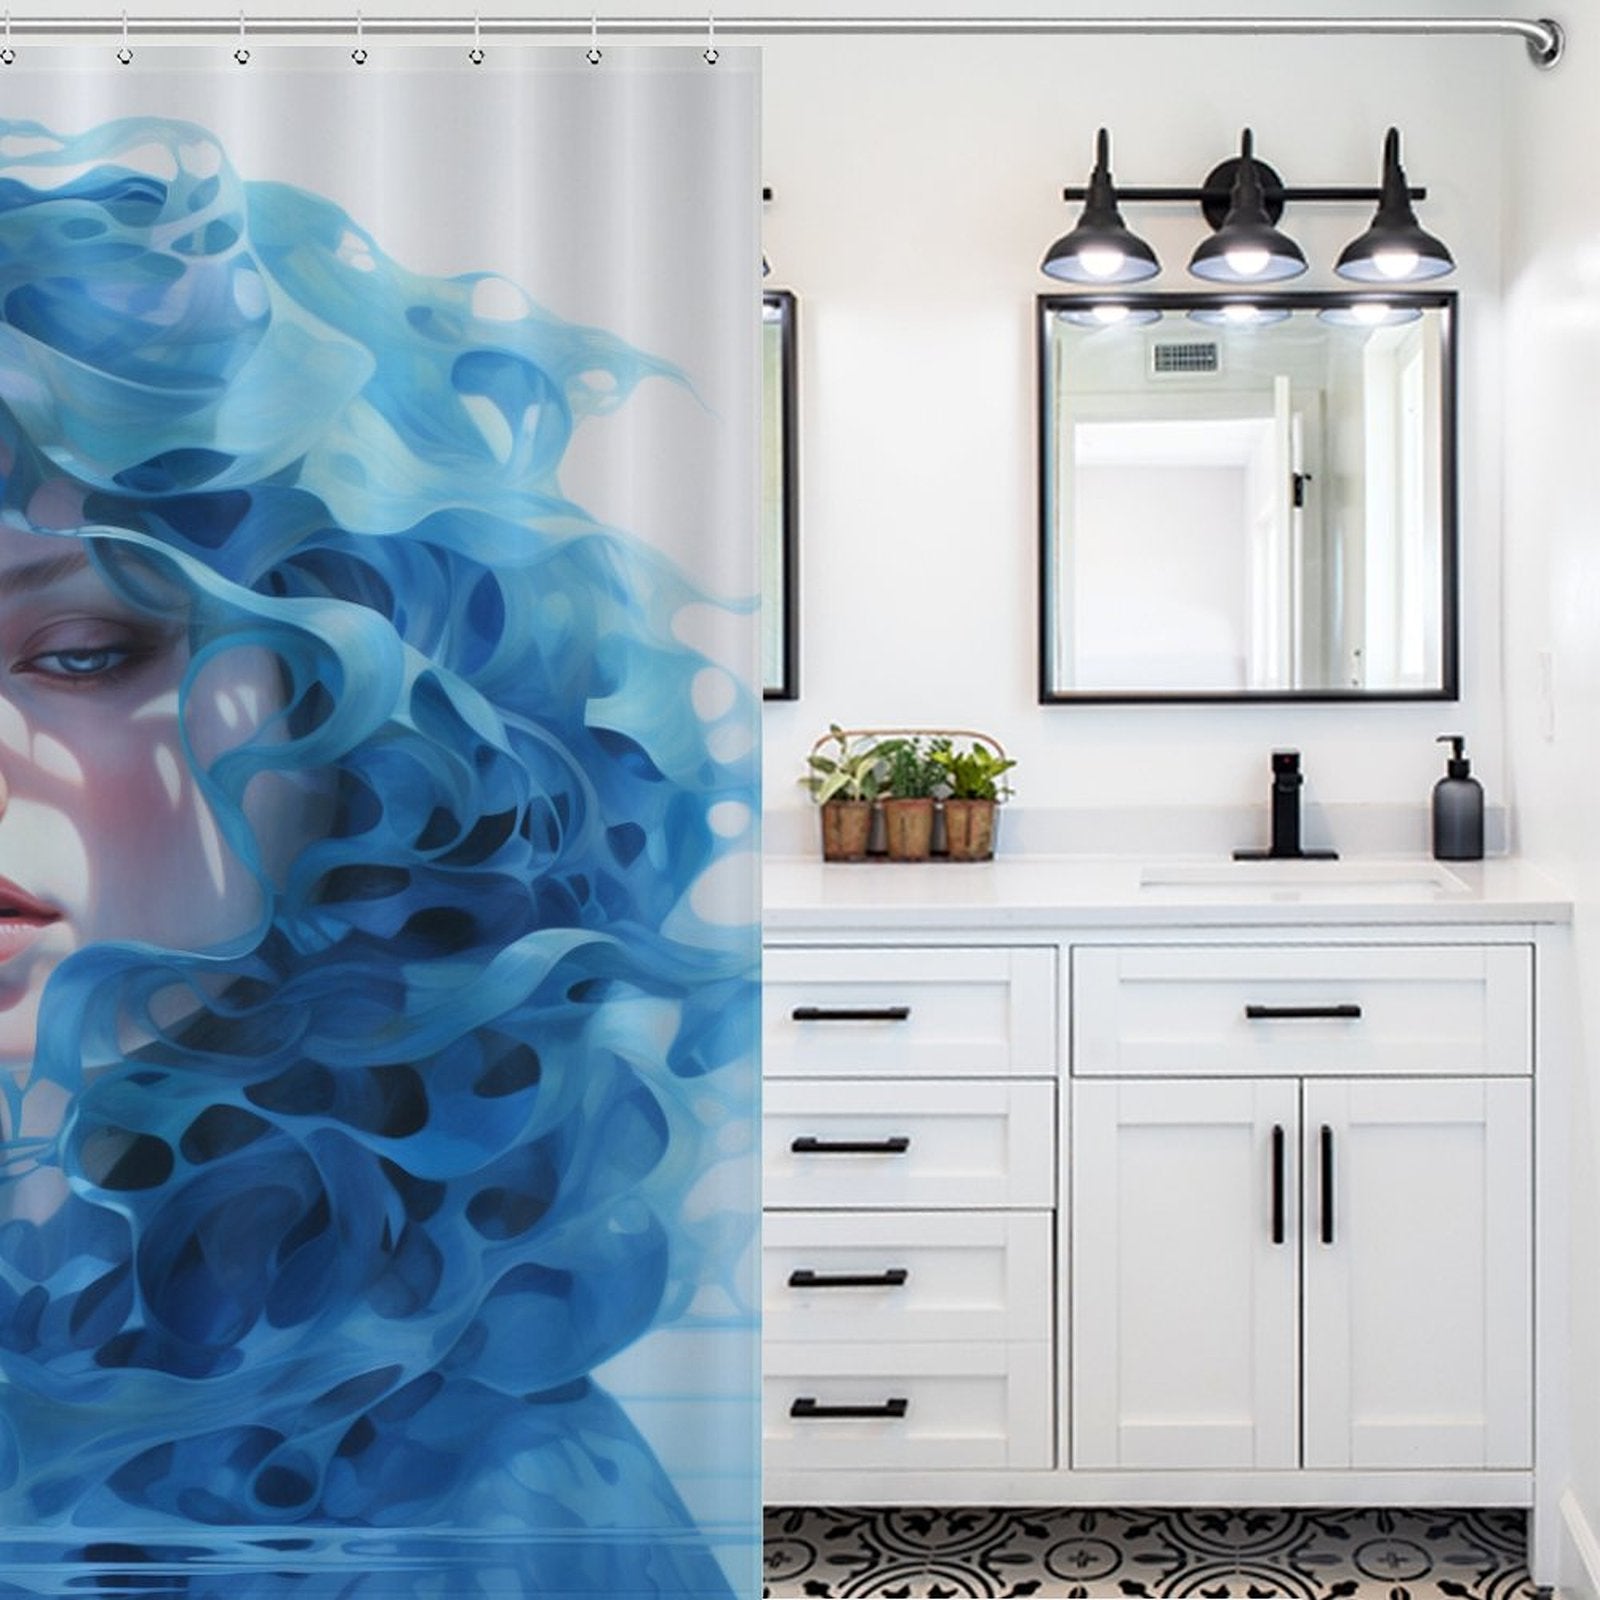 Chic Blue Ombre Shower Curtain